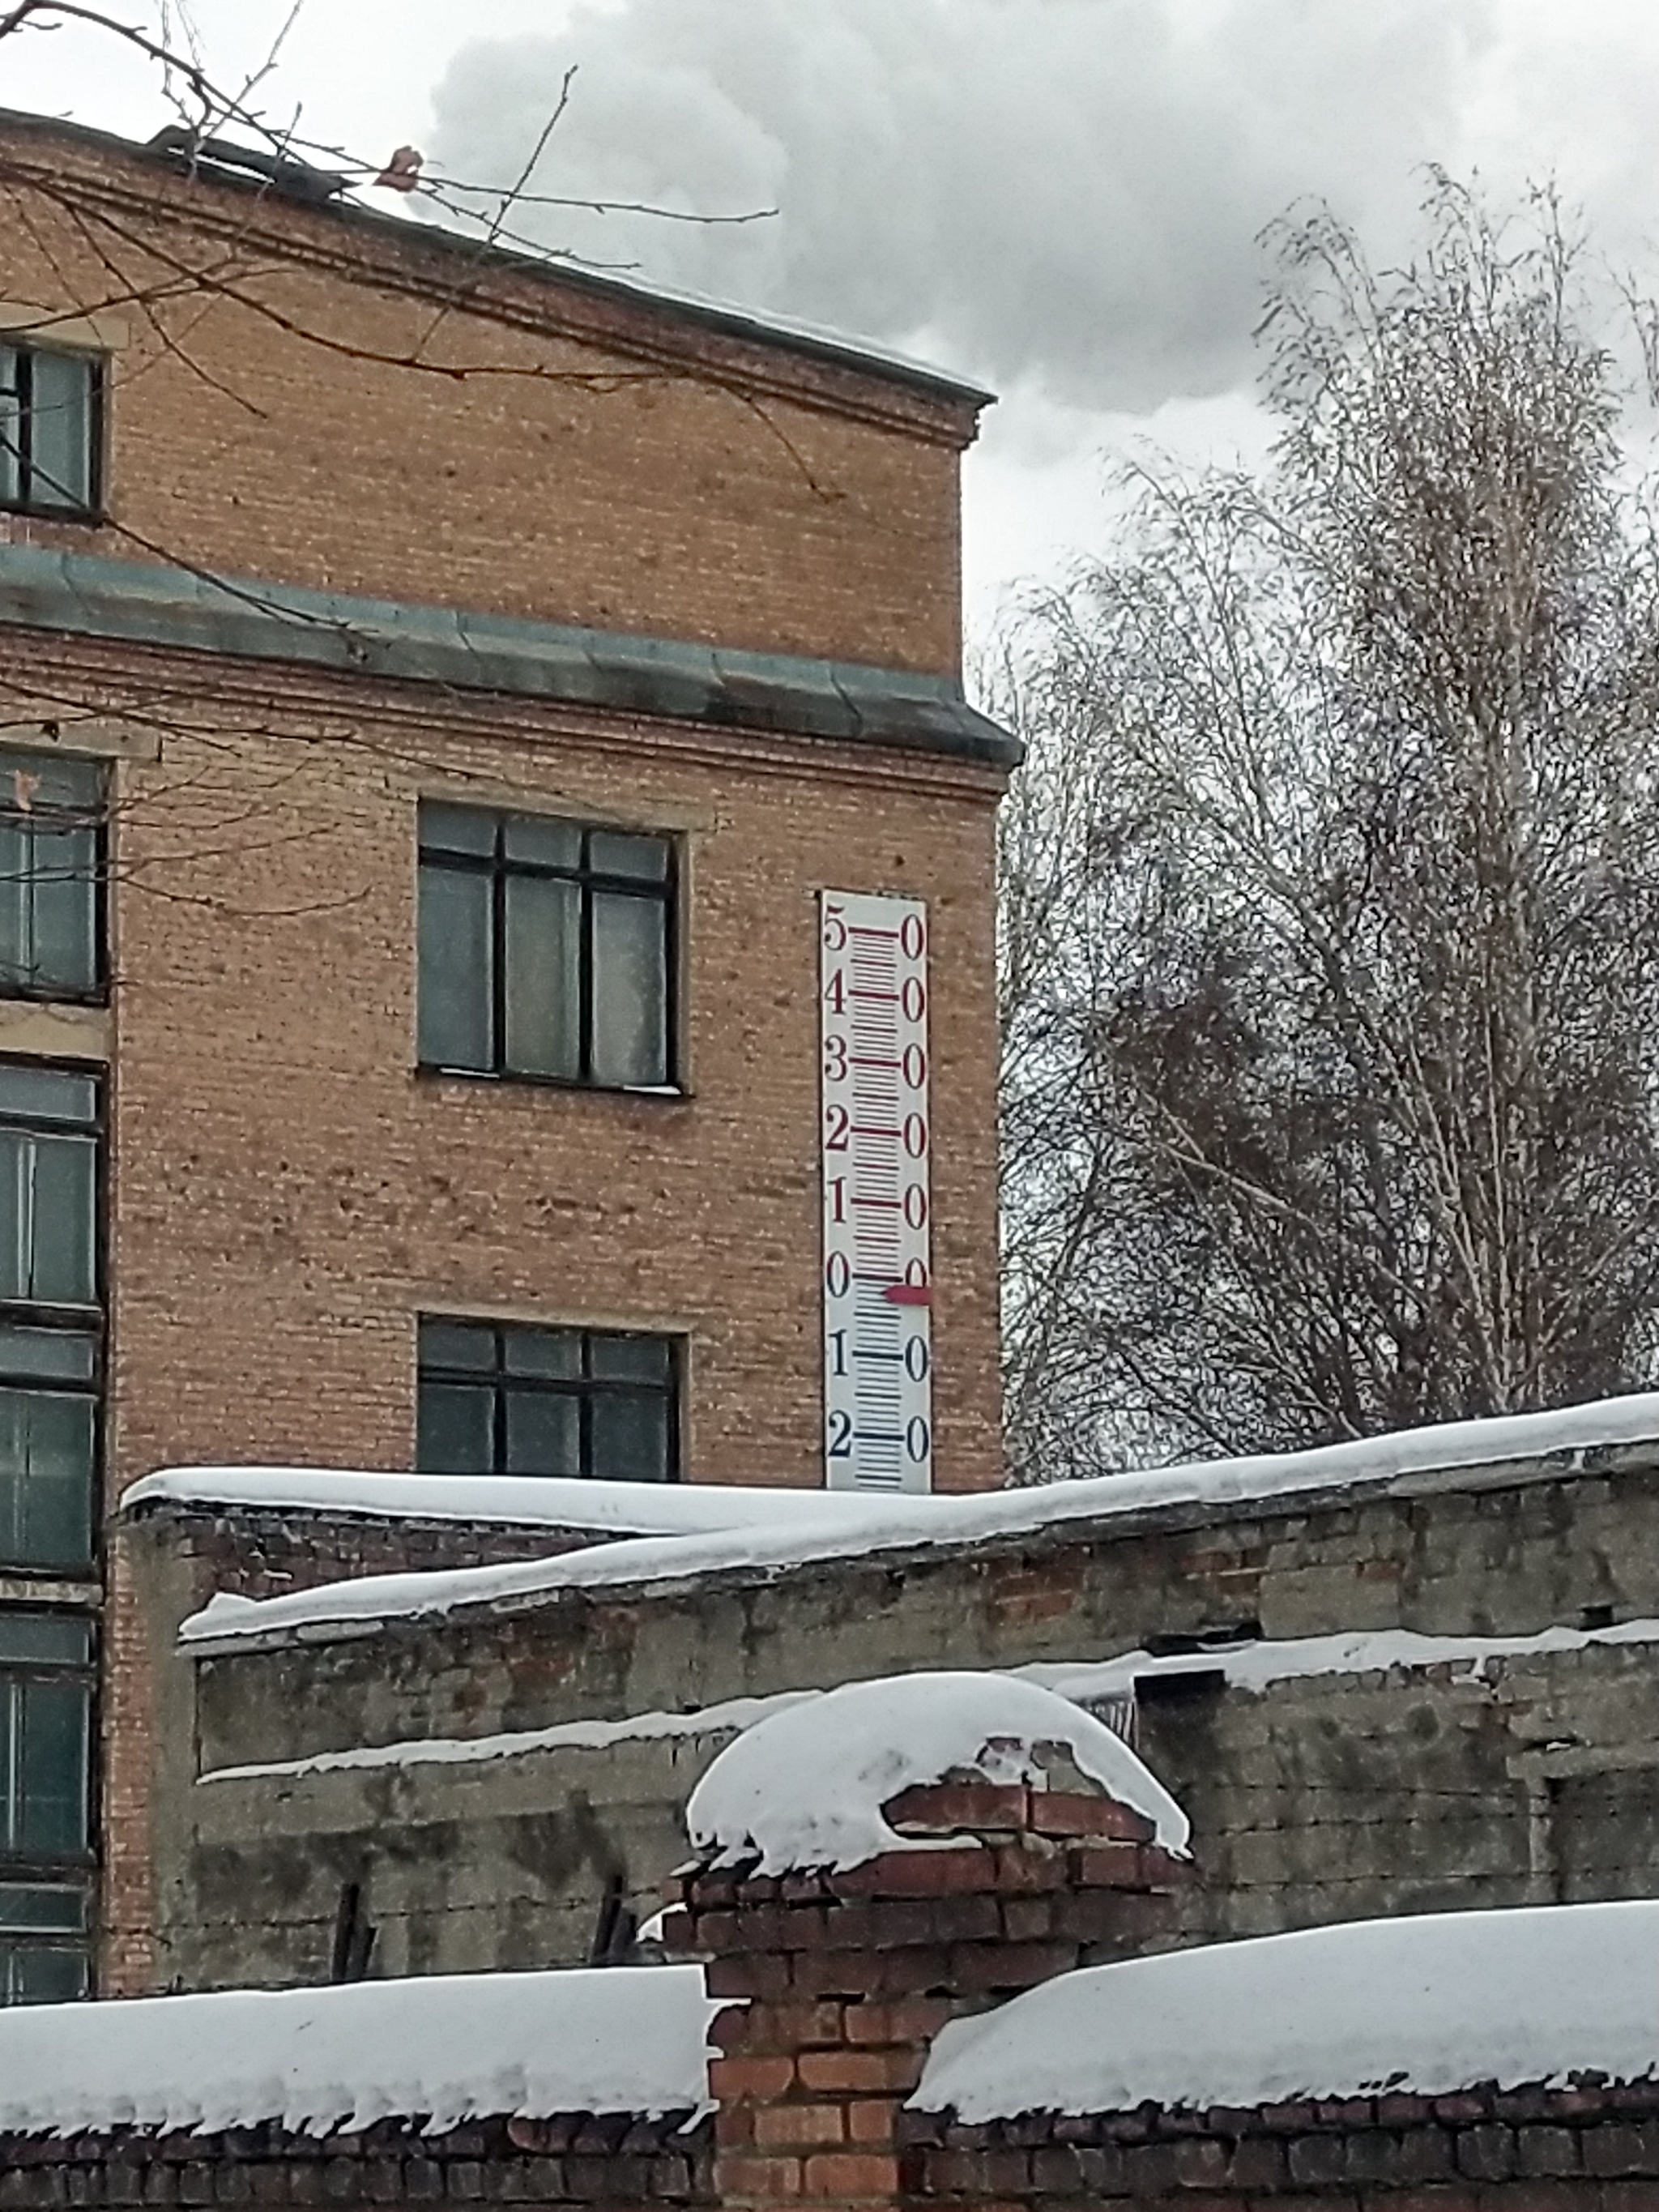 Nothing unusual, just a wall thermometer in the city of Ust-Kamenogorsk. By the way, it shows almost correctly - My, Kazakhstan, Ust-Kamenogorsk, All-Russian Research Institute, Longpost, Thermometer